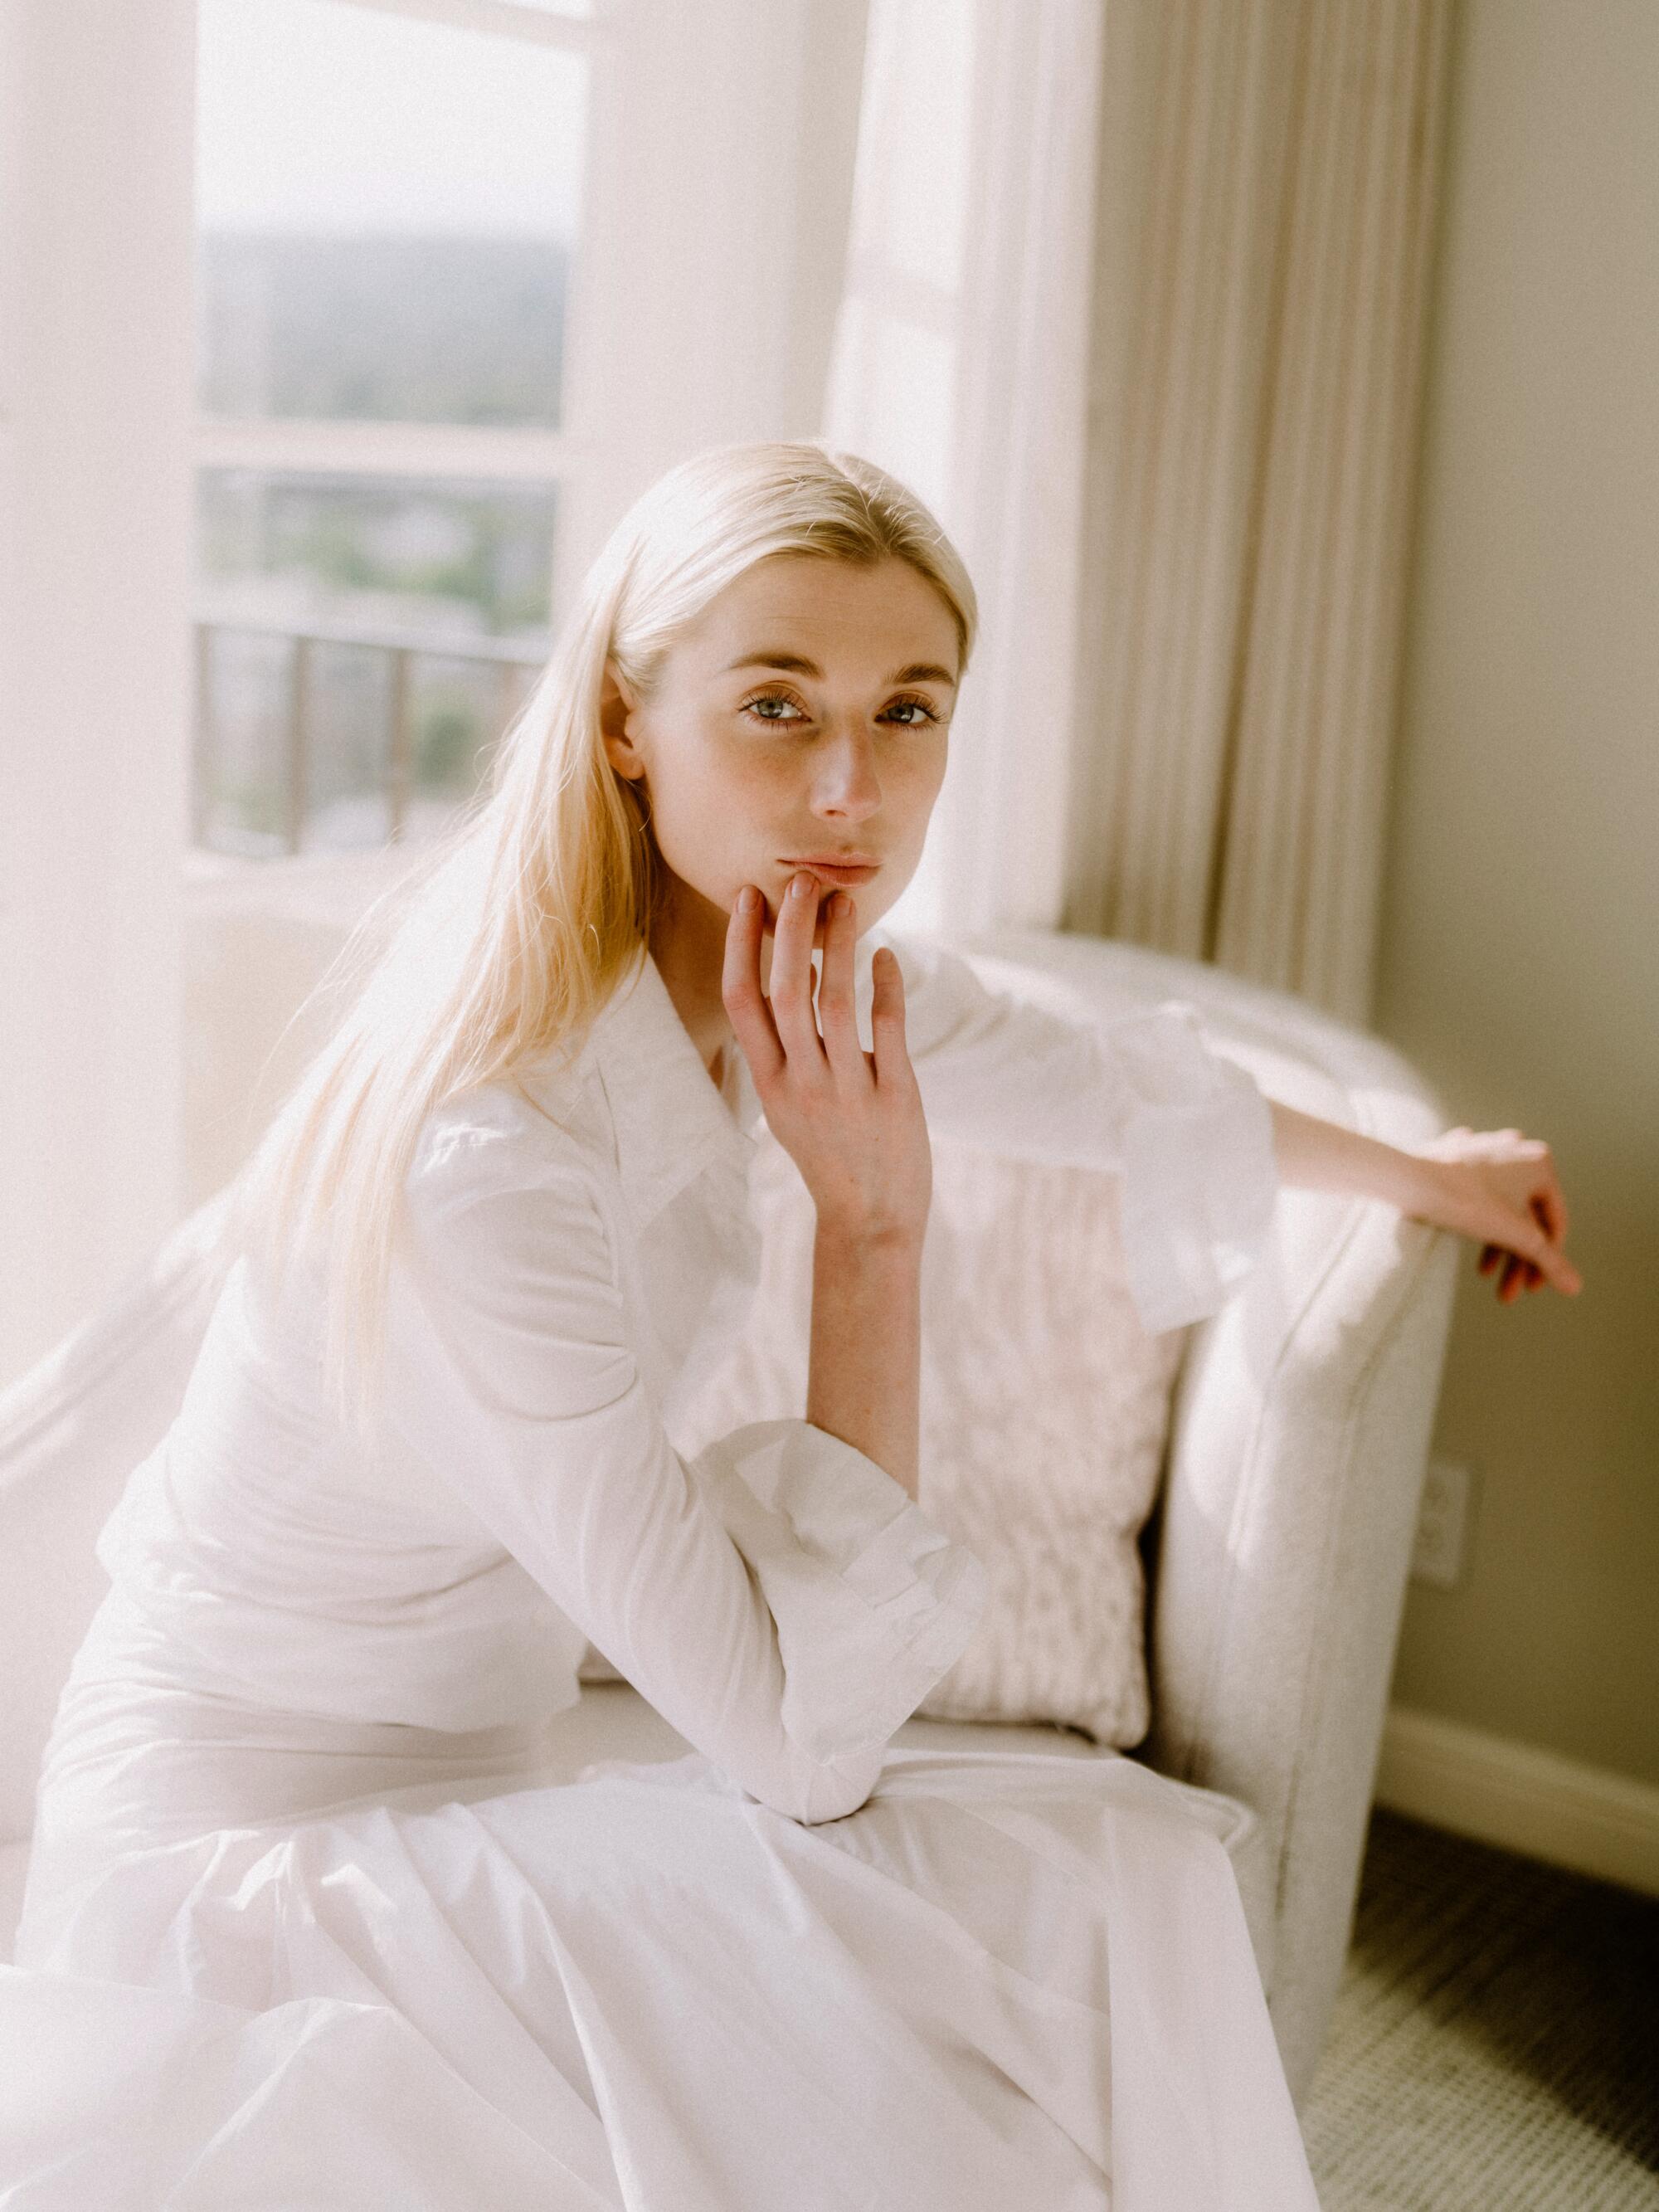 Elizabeth Debicki rest her arm on the couch.